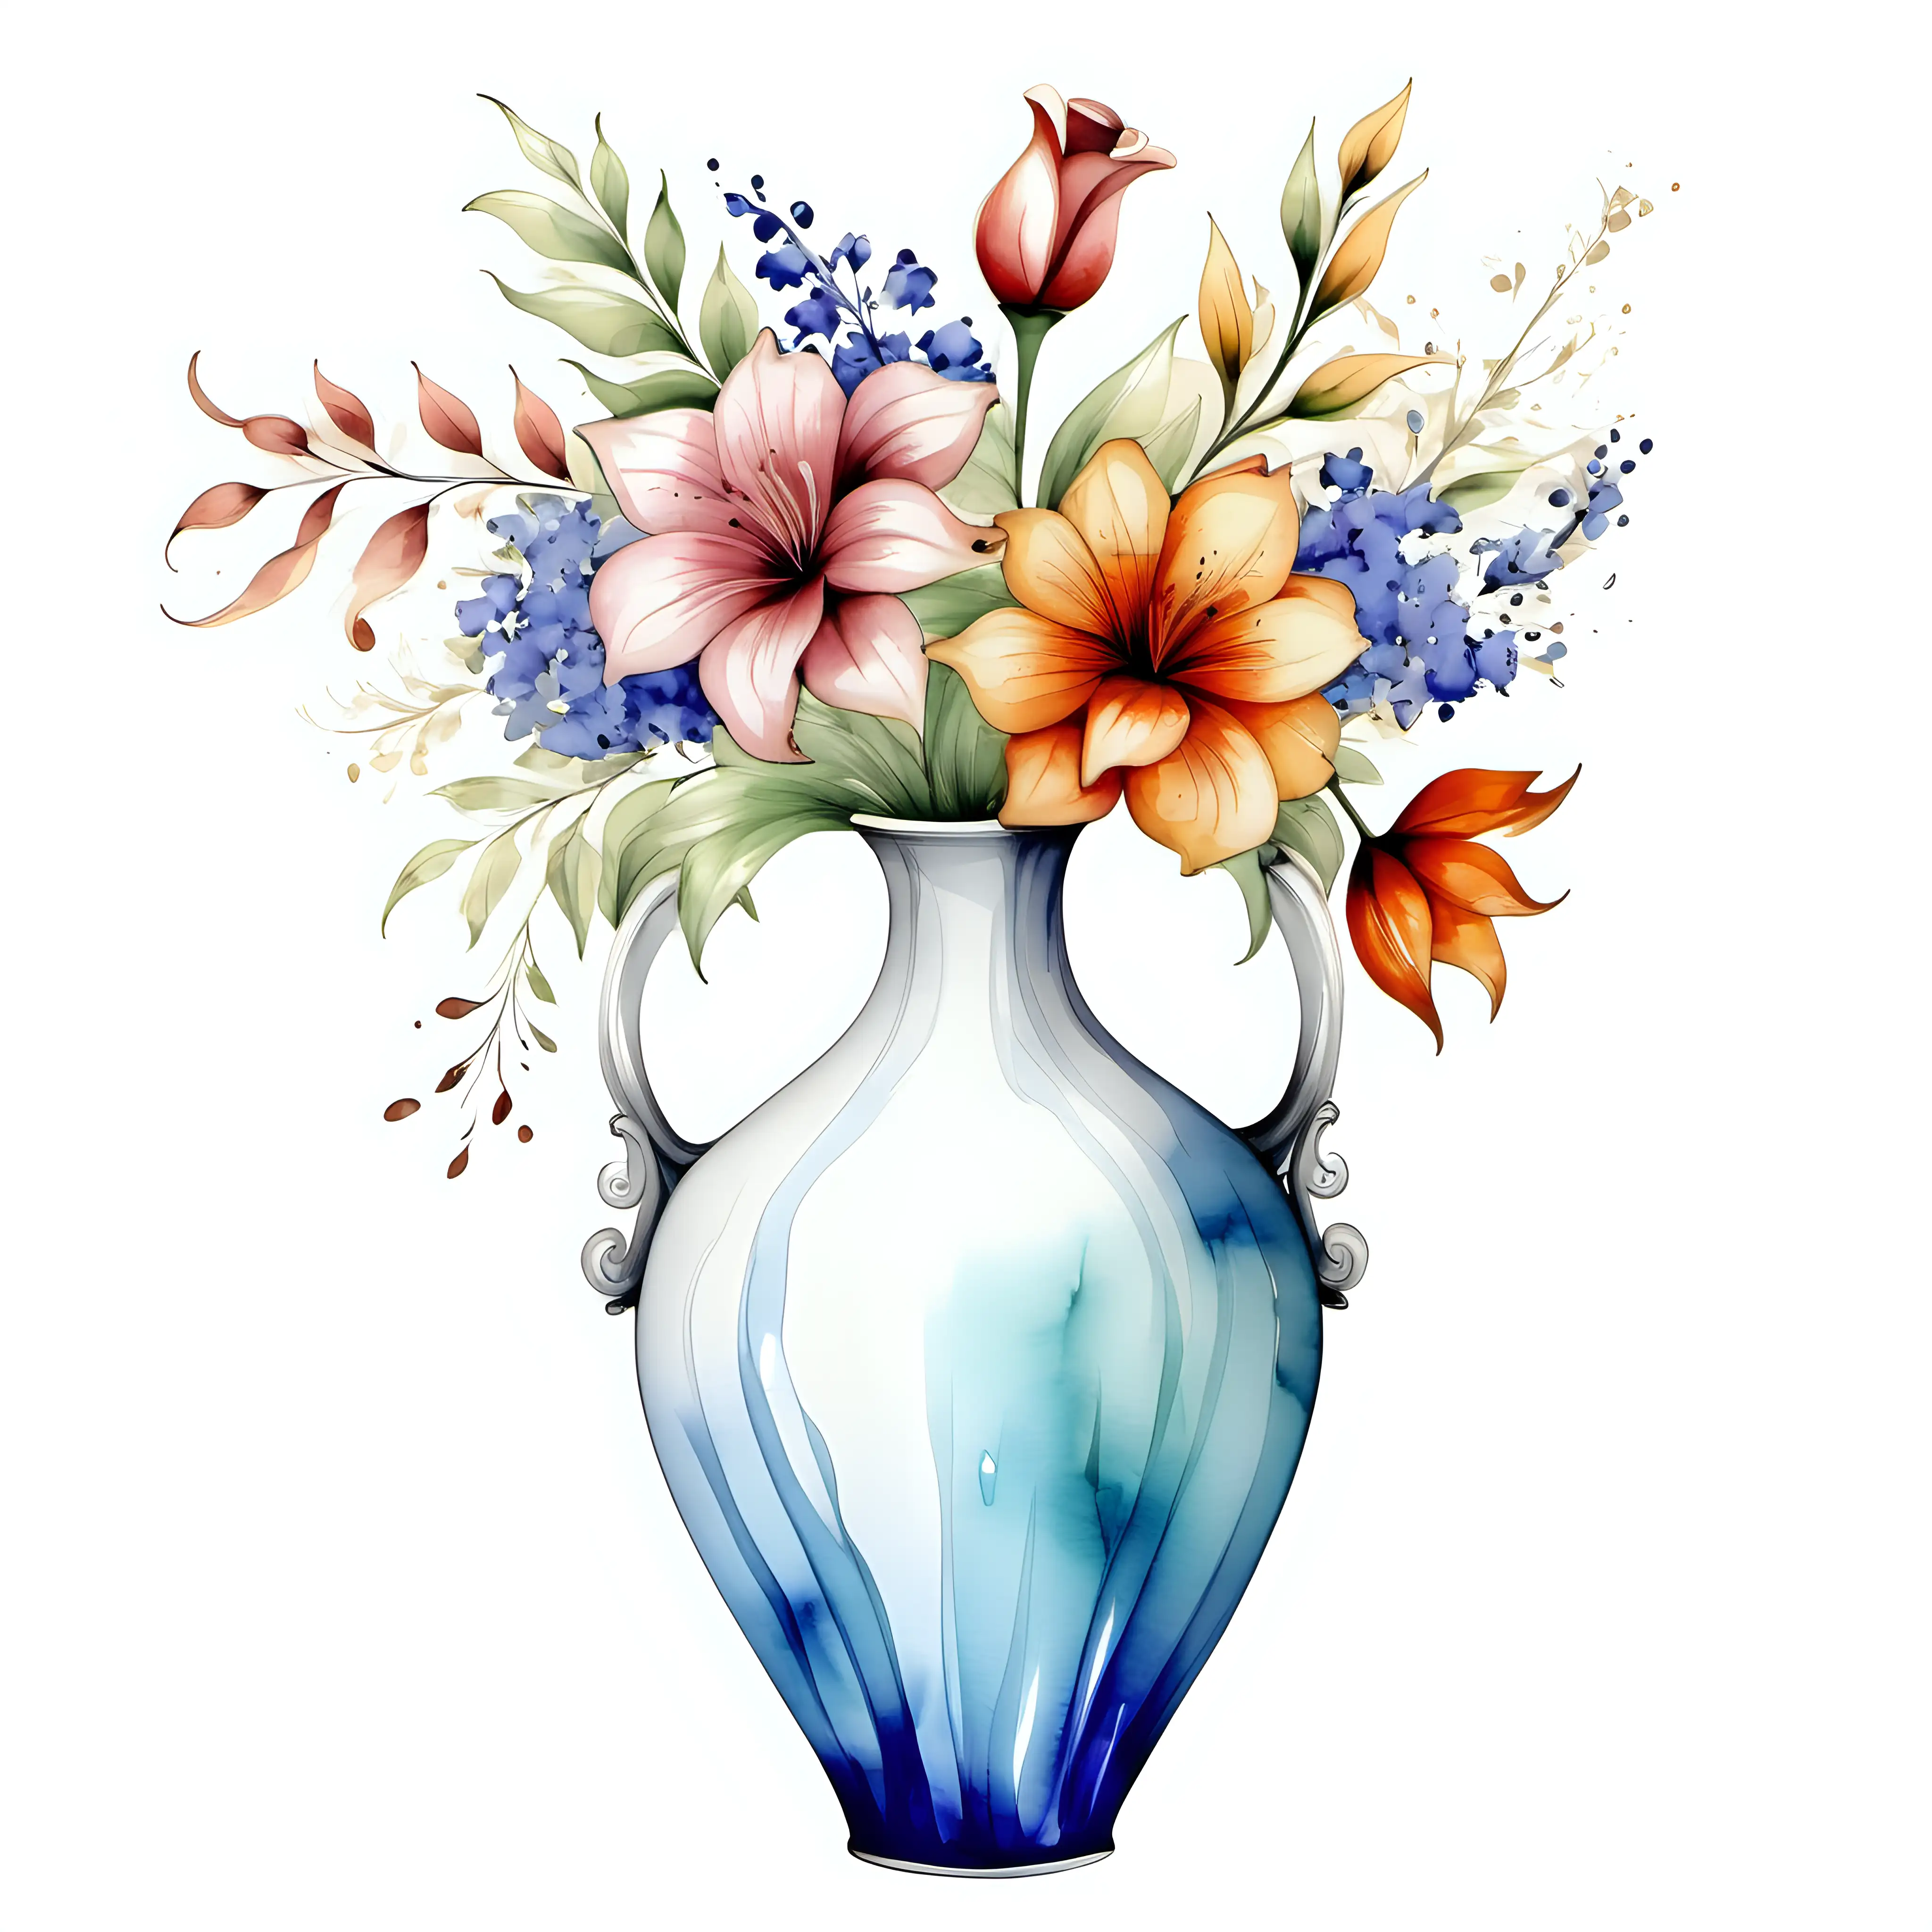 Vibrant Watercolored Vase on a White Background